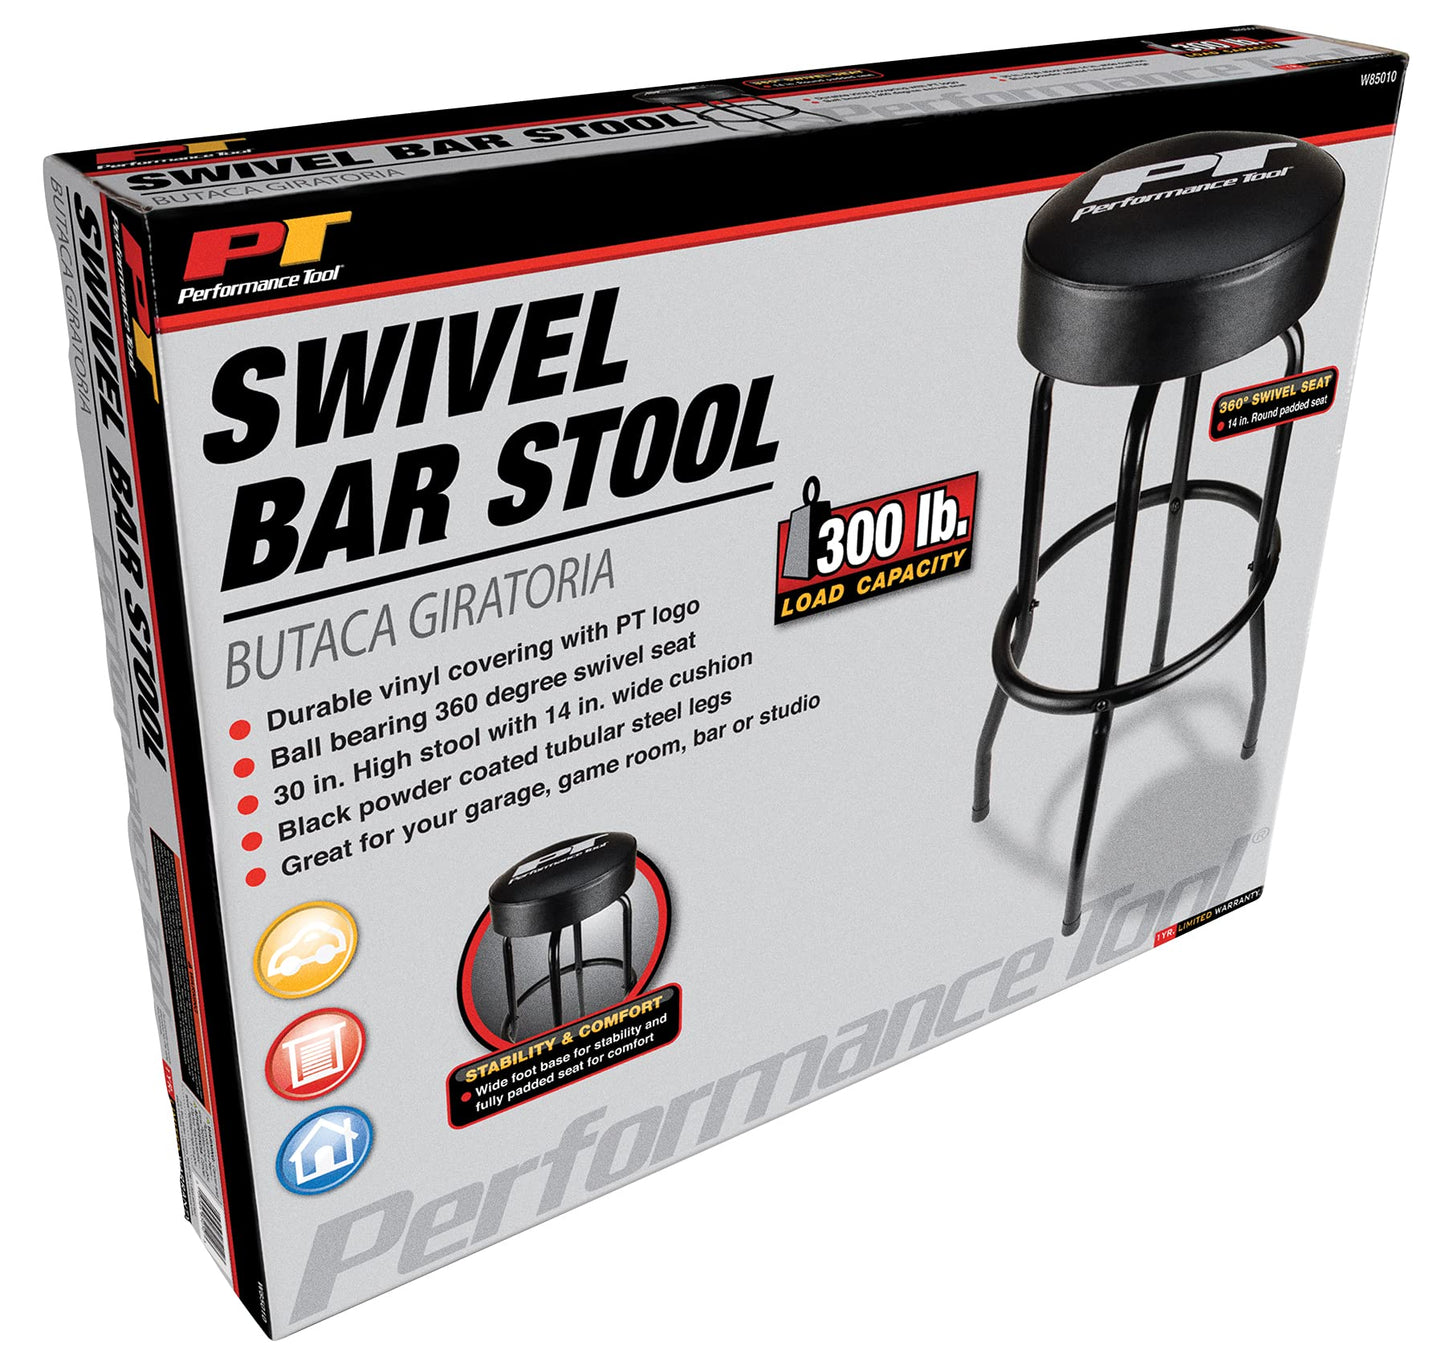 Performance Tool W85010 Swivel Seat Bar Stool for Mechanic Garages and Workshops, Black, 0.6x9.8x5.8-Inches